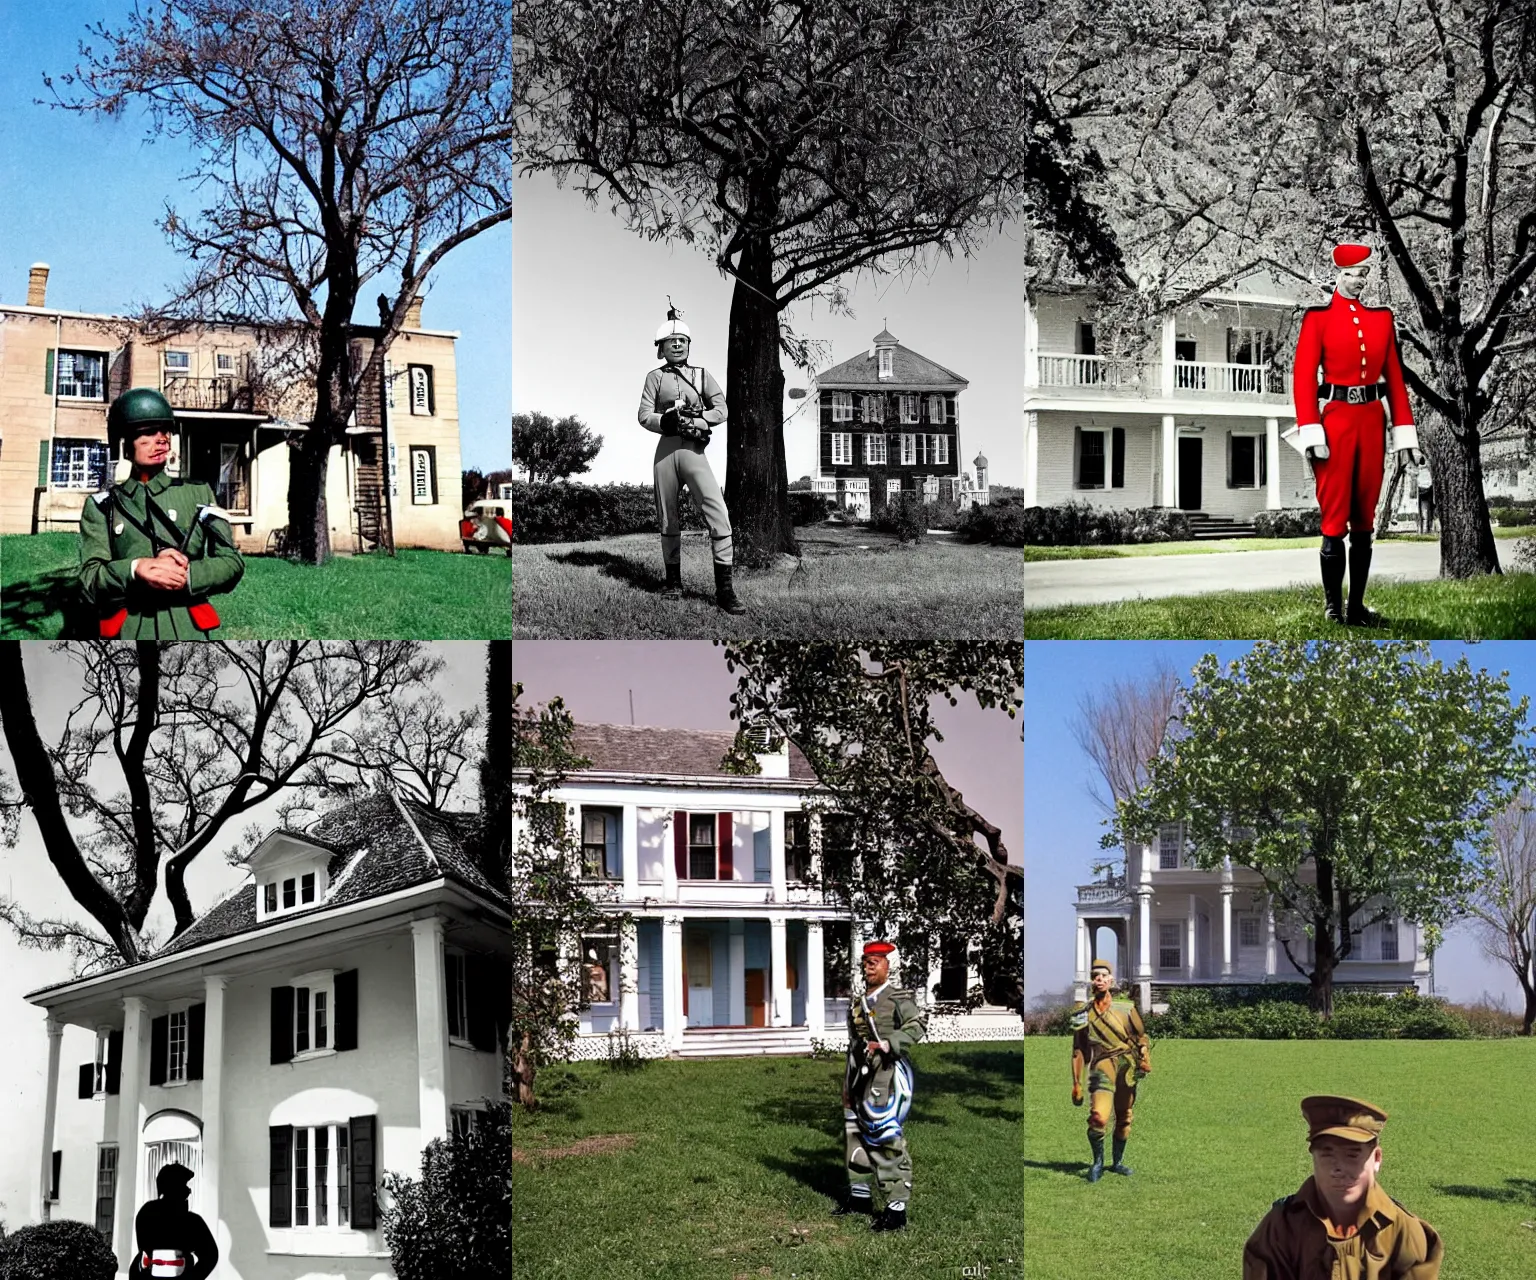 Prompt: retro-futurism style, Soldier by apple tree, colonial house in background